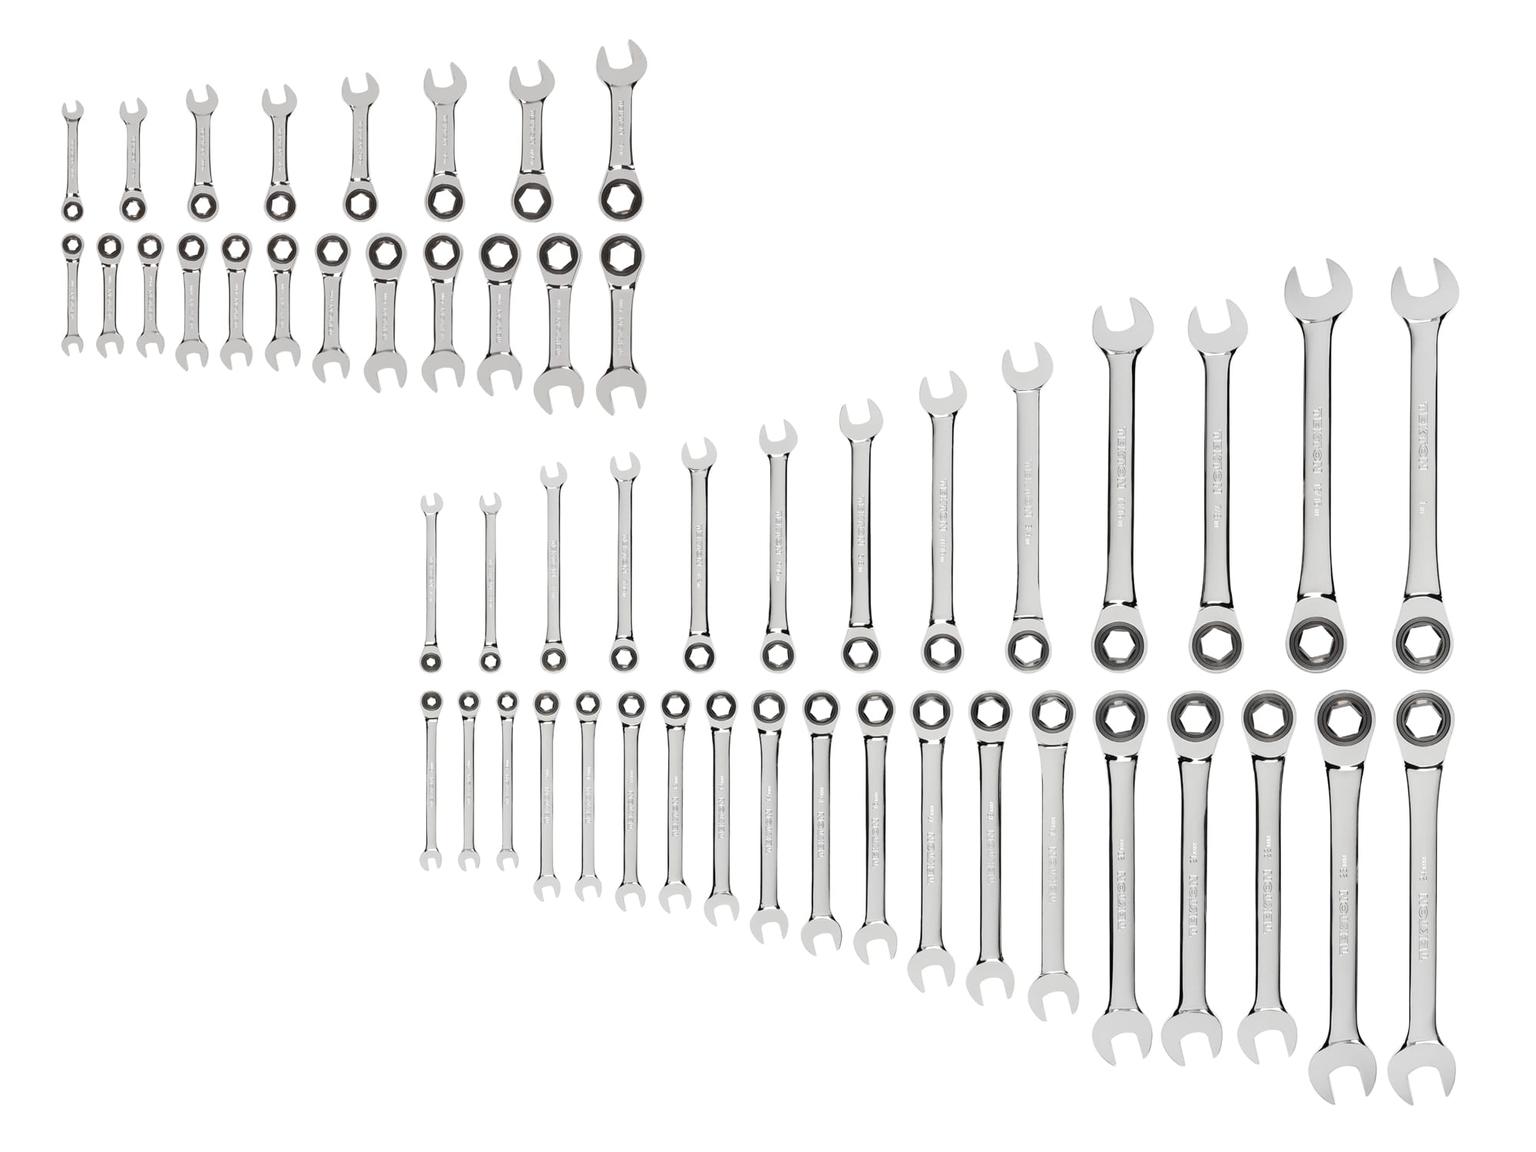 TEKTON WRN53602-T Stubby and Standard Length Ratcheting Wrench Set, 52-Piece (1/4 - 1 in., 6-24 mm)